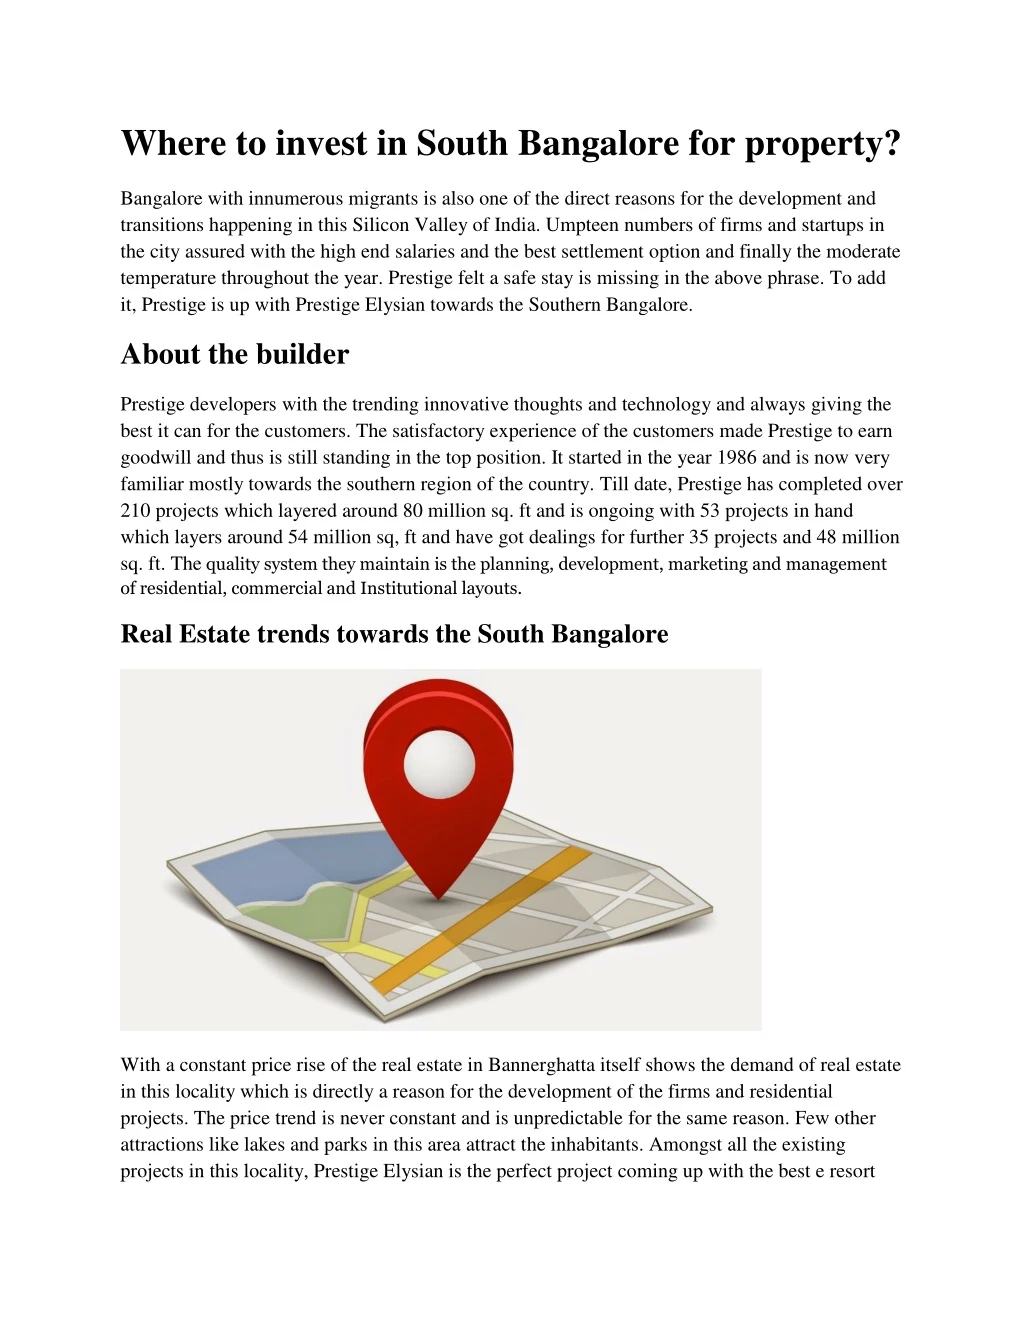 where to invest in south bangalore for property